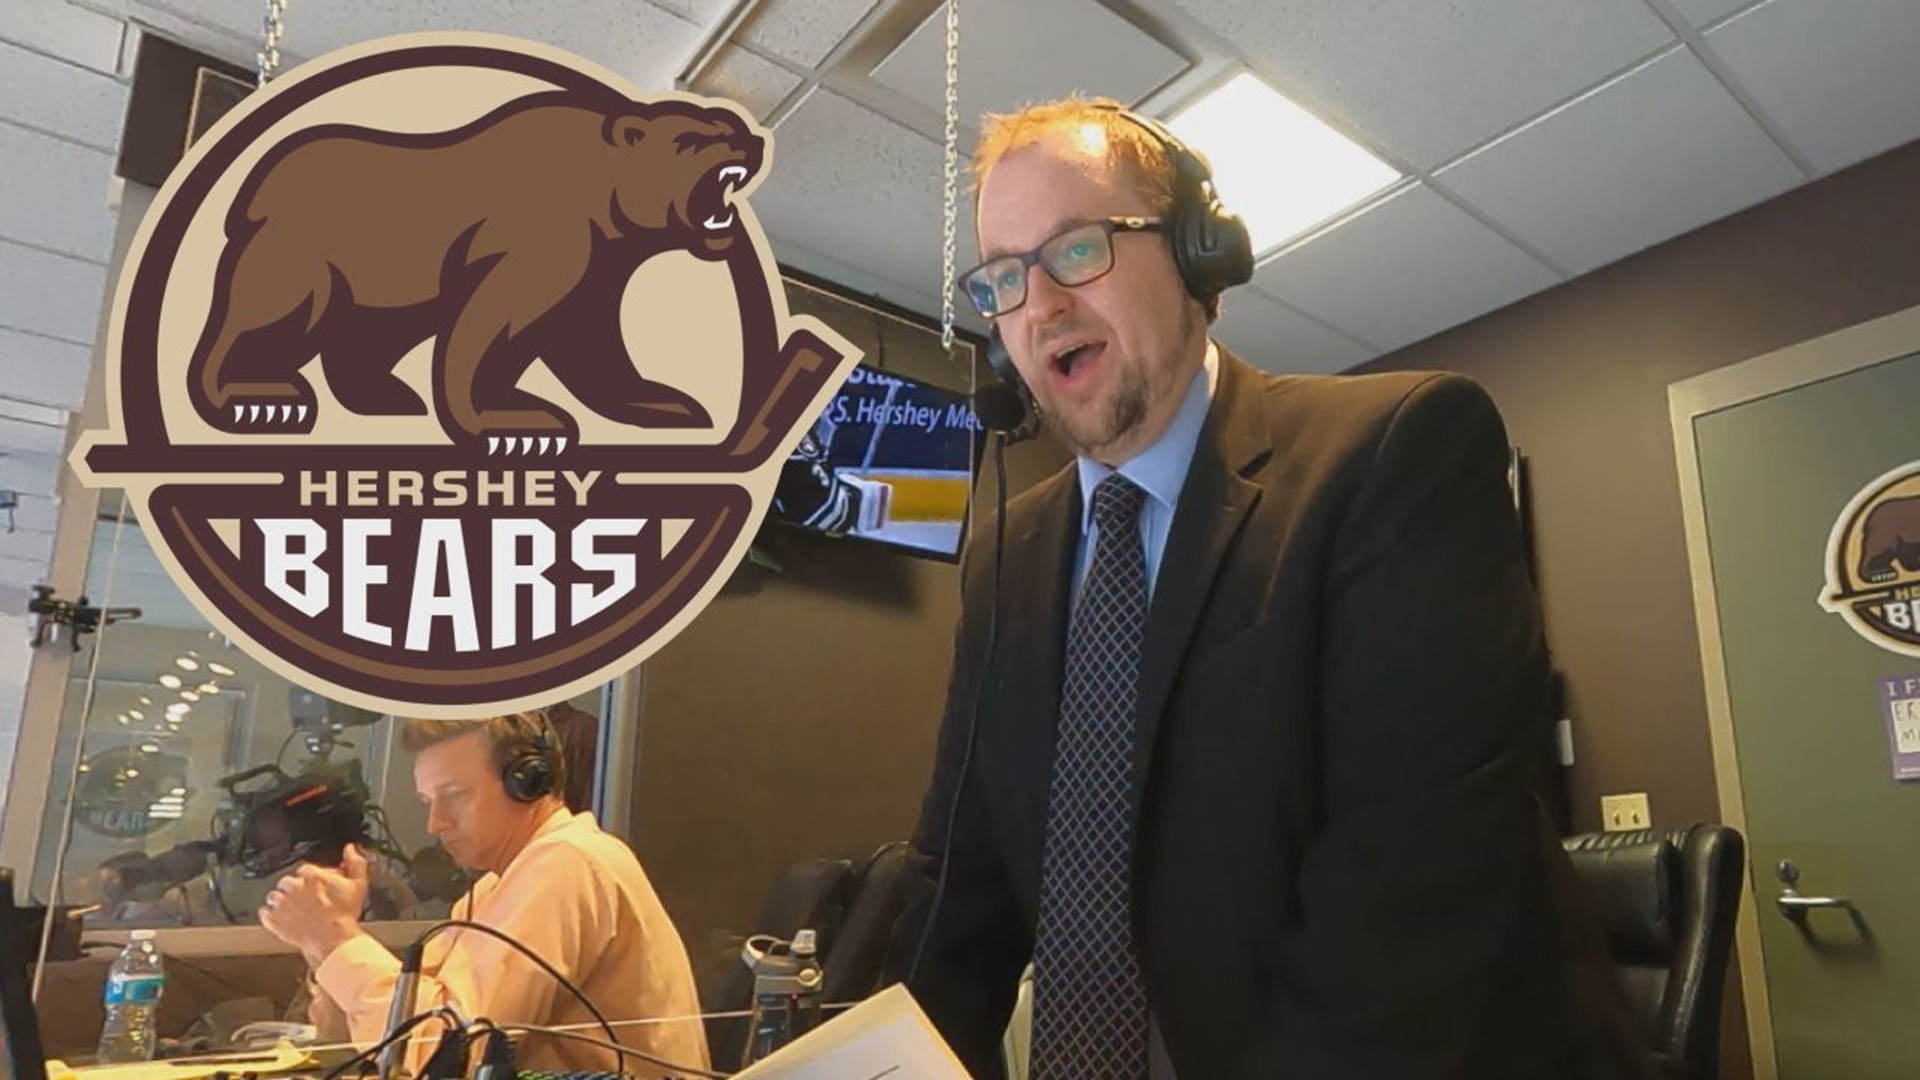 Some big-time NHL names have called Hershey Bears games in the past and Fisch could be the next chapter in that book.